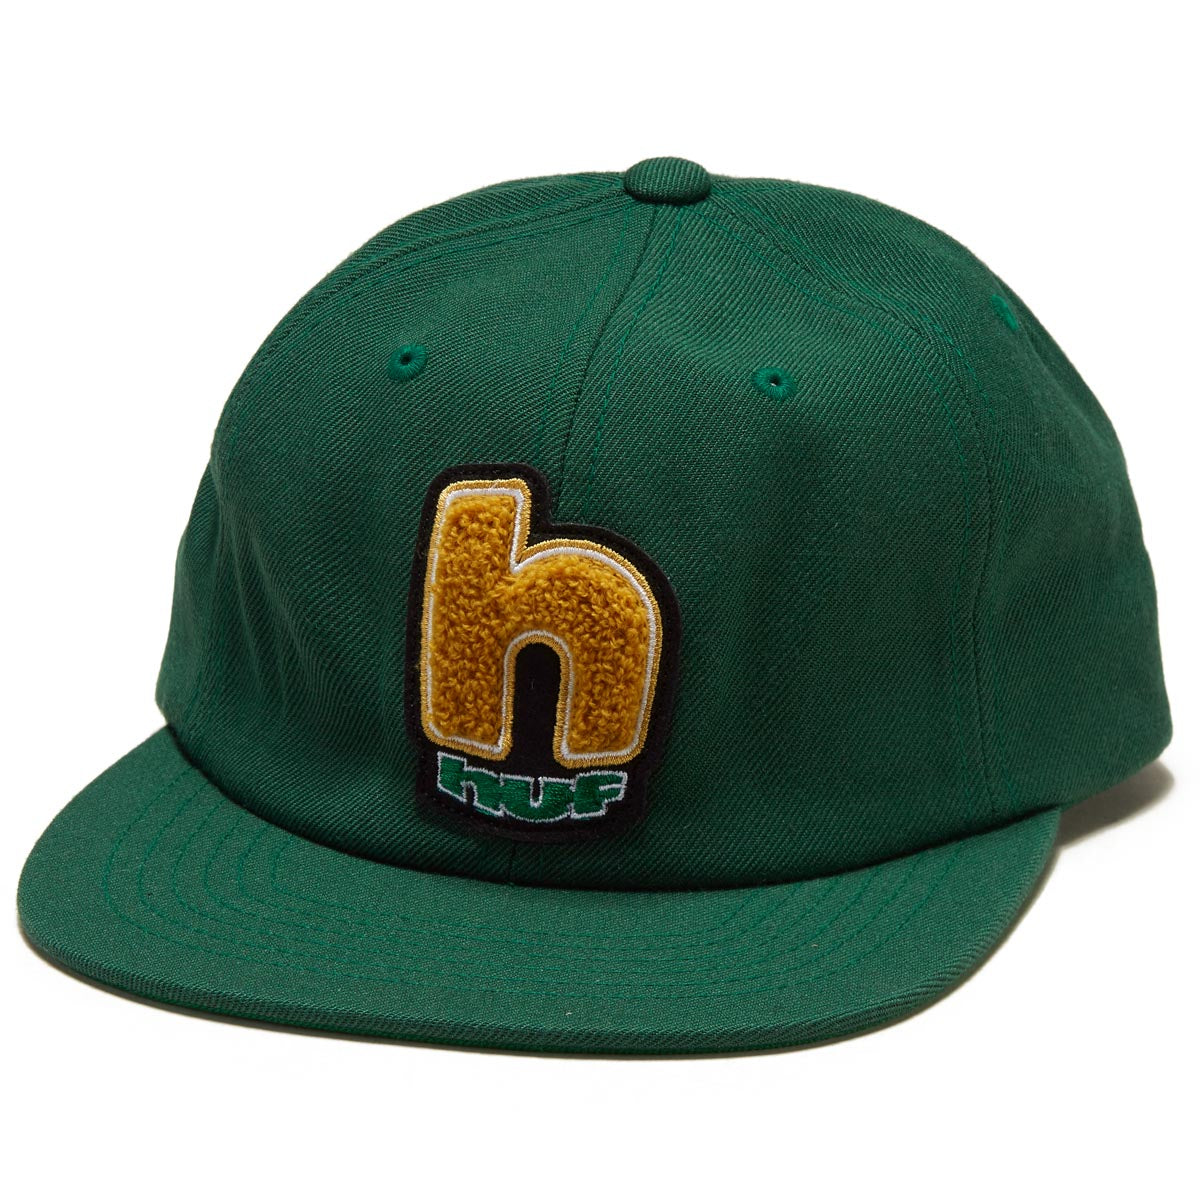 HUF Moab H 6 Panel Hat - Forest Green image 1